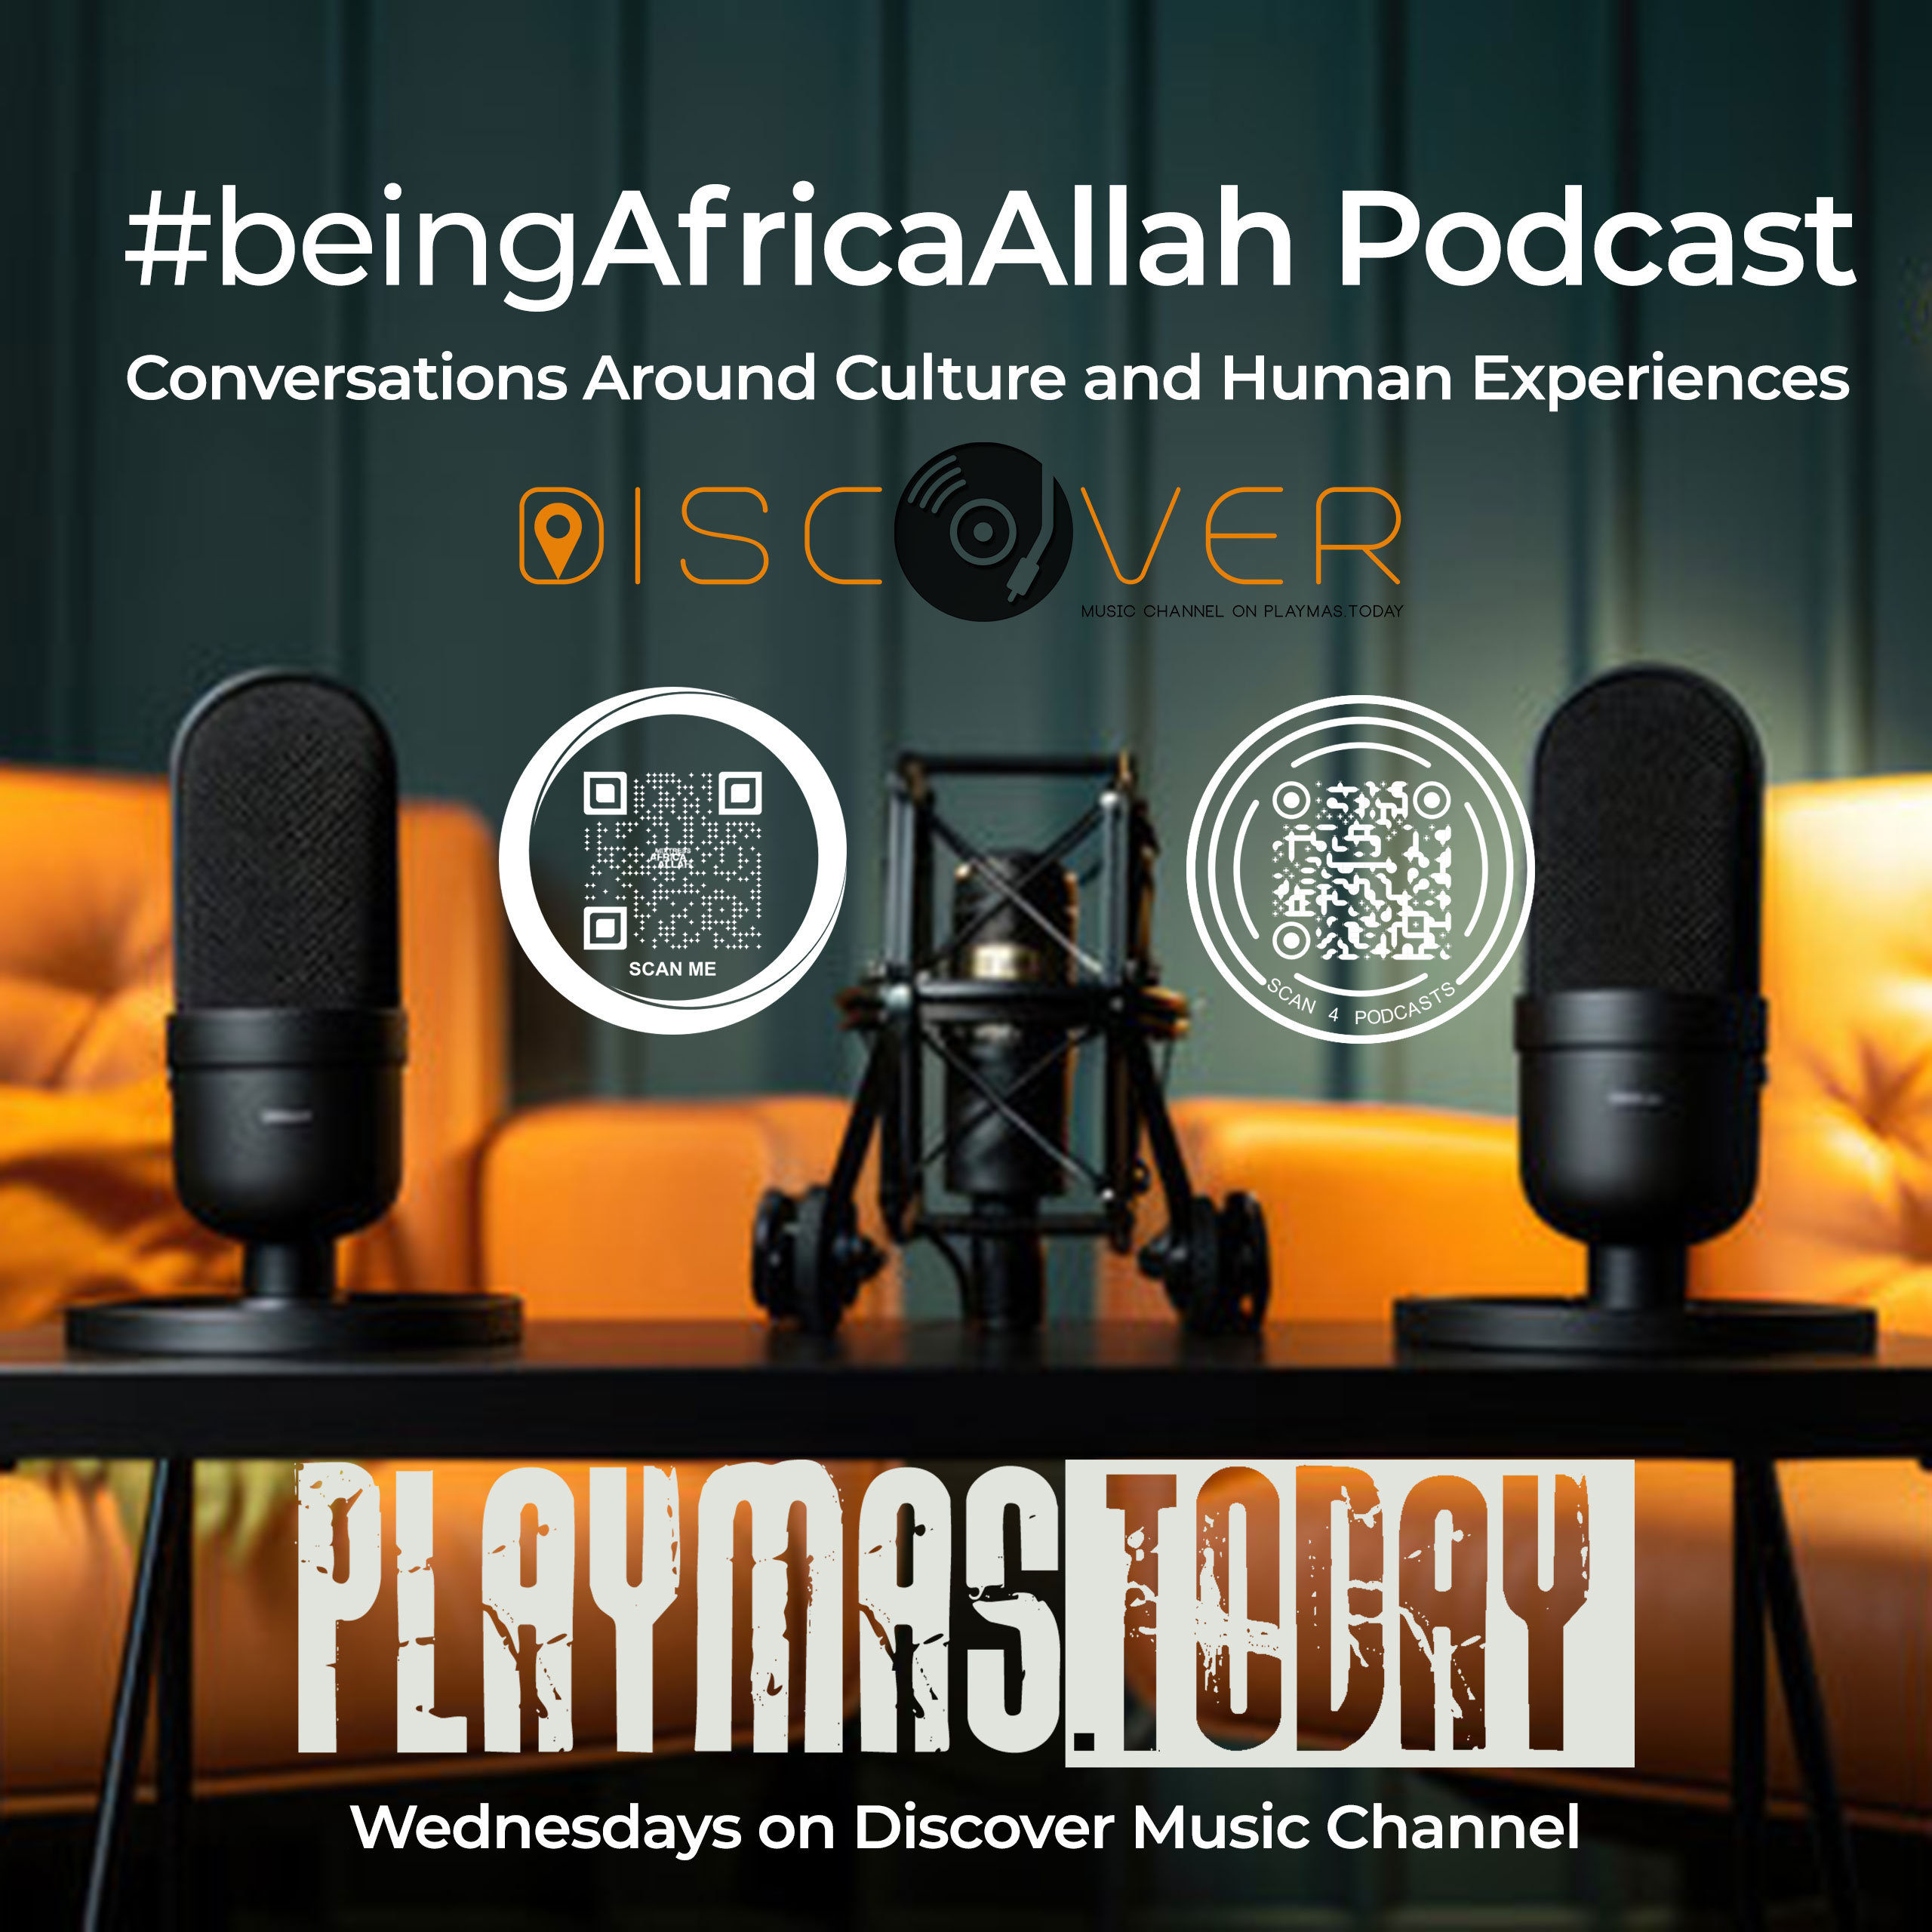 Rap Feuds Transformed by Technology and Social Trends #beingAfricaAllah Vol 28_04